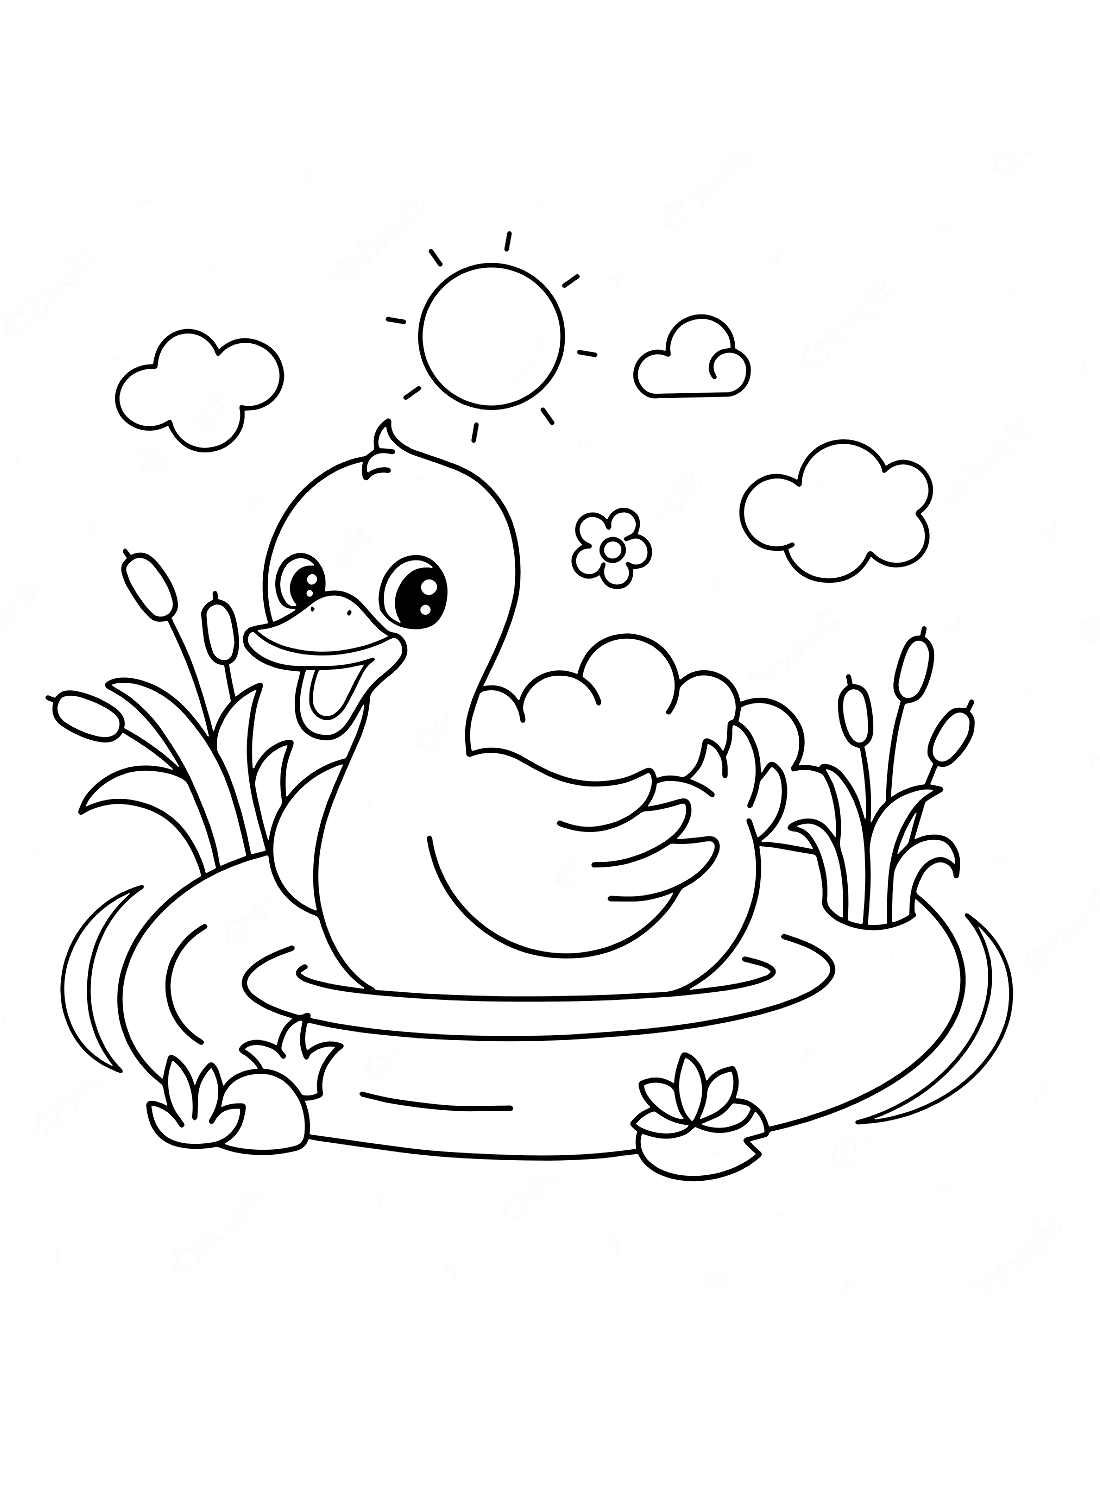 Little Adorable Duckling Coloring Page